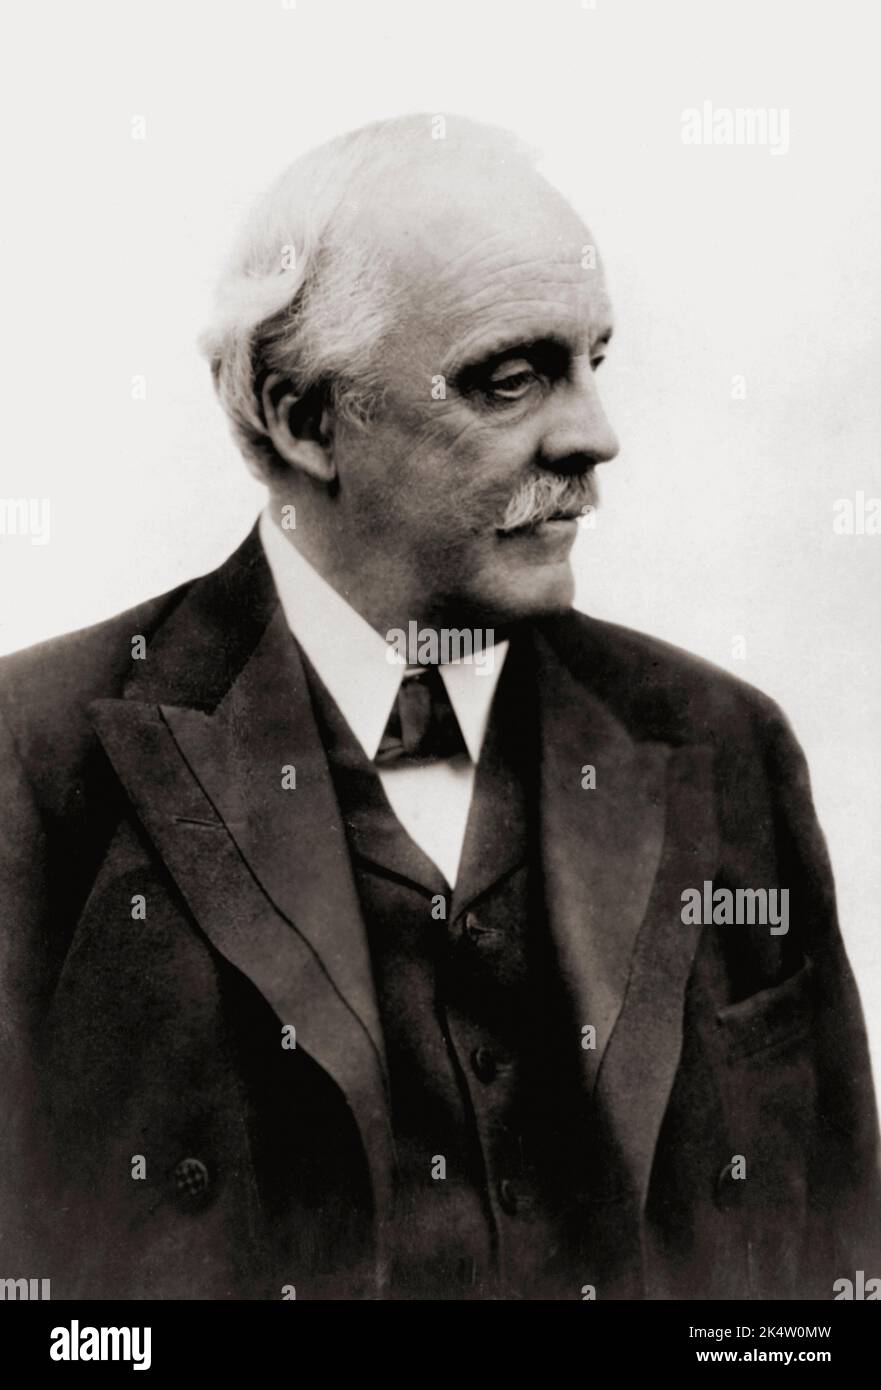 Arthur James Balfour, 1st Earl of Balfour, 1848 – 1930. British Conservative politician, statesman and Prime Minister. Stock Photo